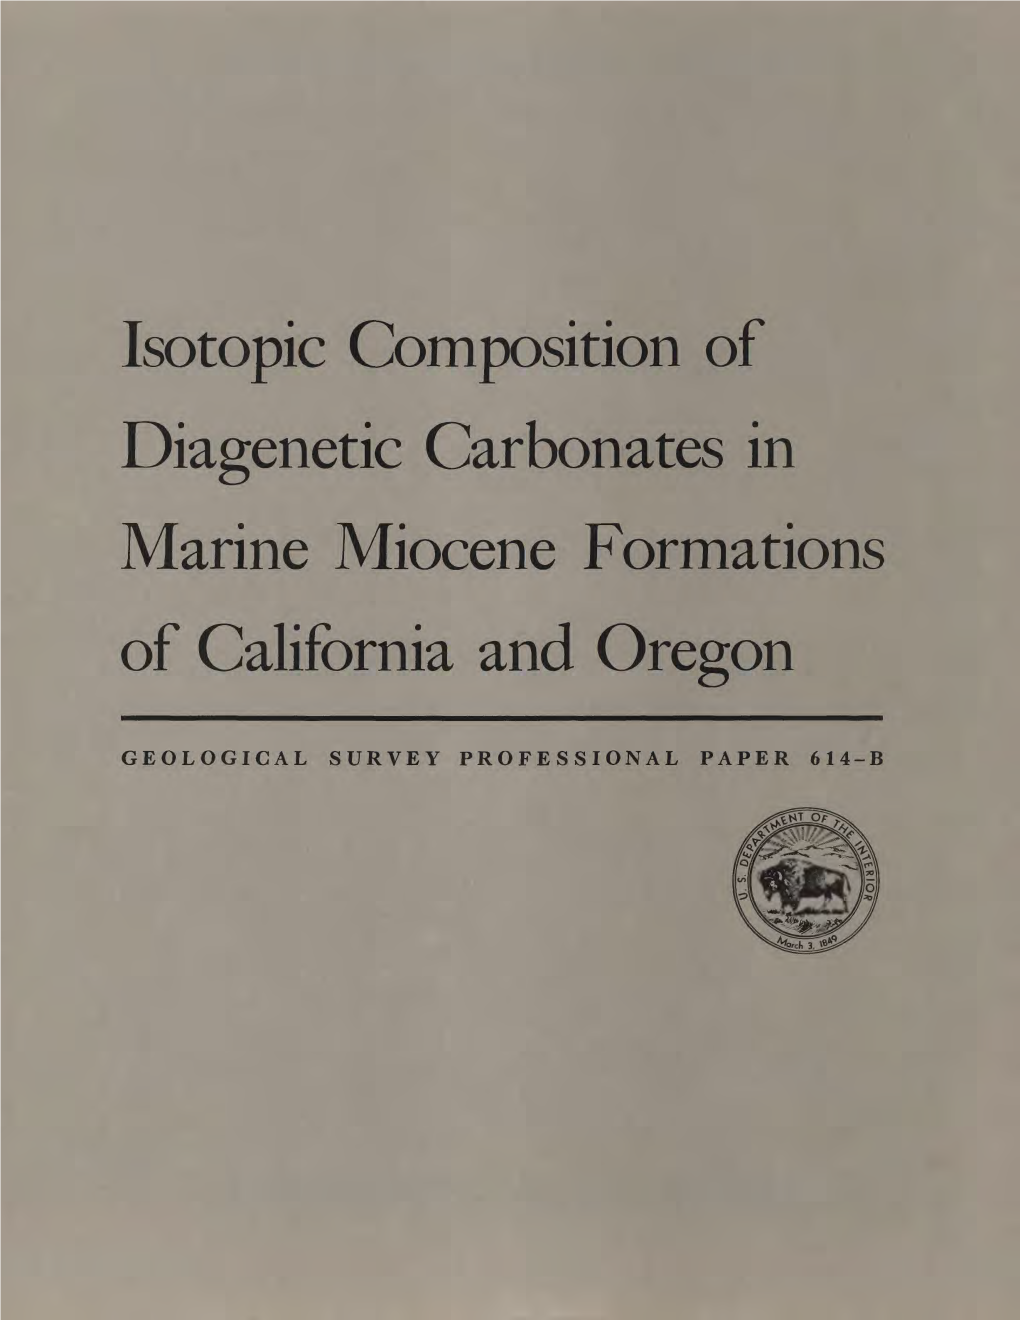 Isotopic Composition of Diagenetic Carbonates in Marine Miocene Formations of California and Oregon